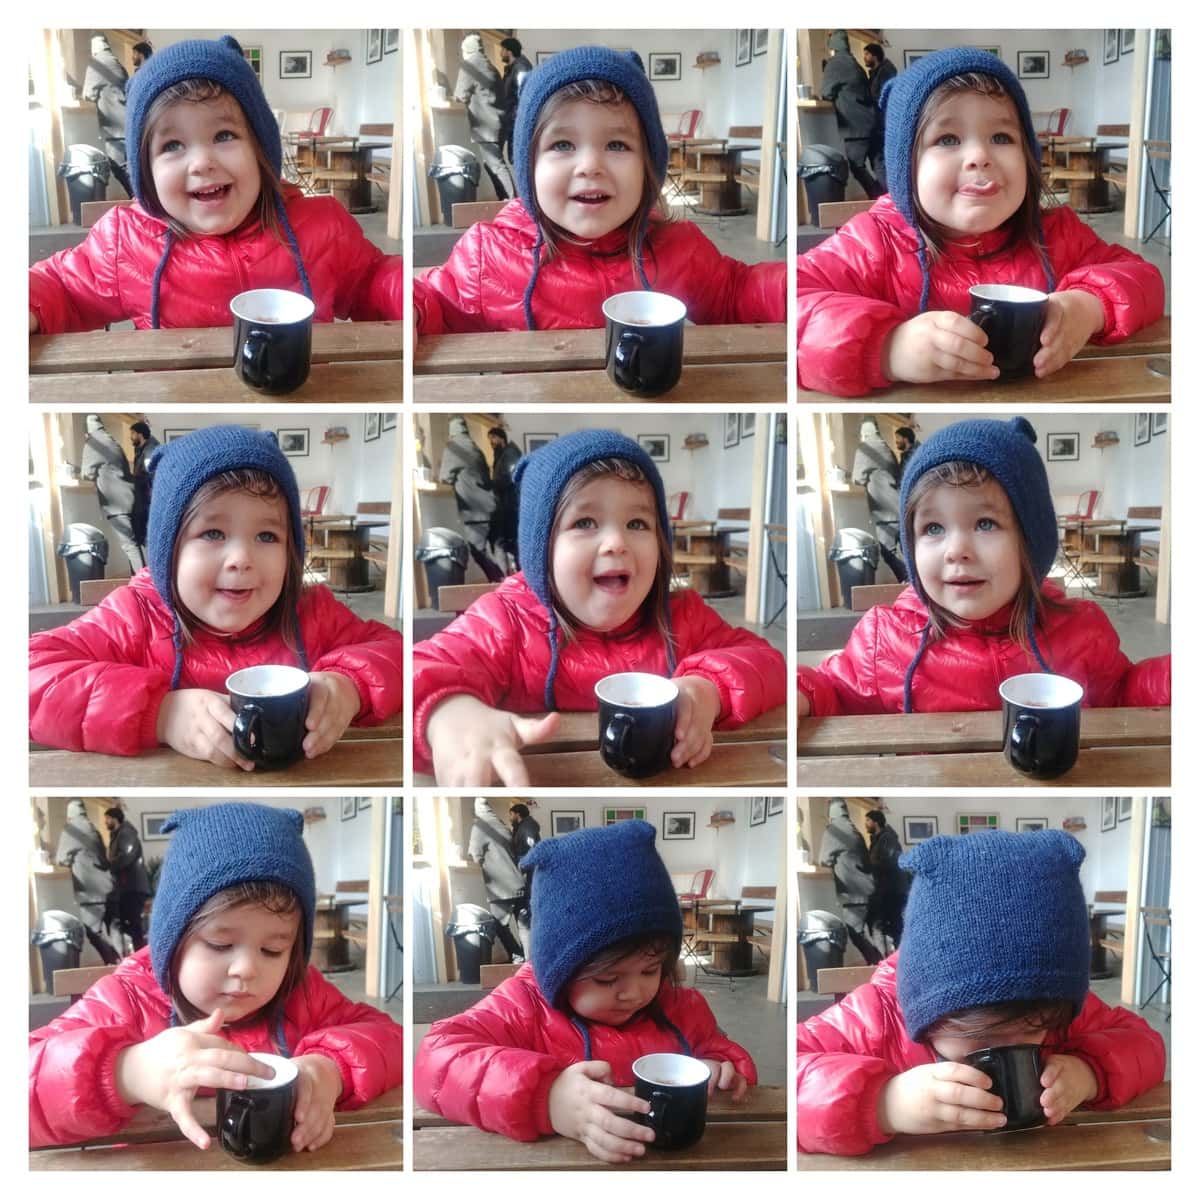 image: a collage of 9 images - the same child in the same handknit hat, each with a slightly different facial expression